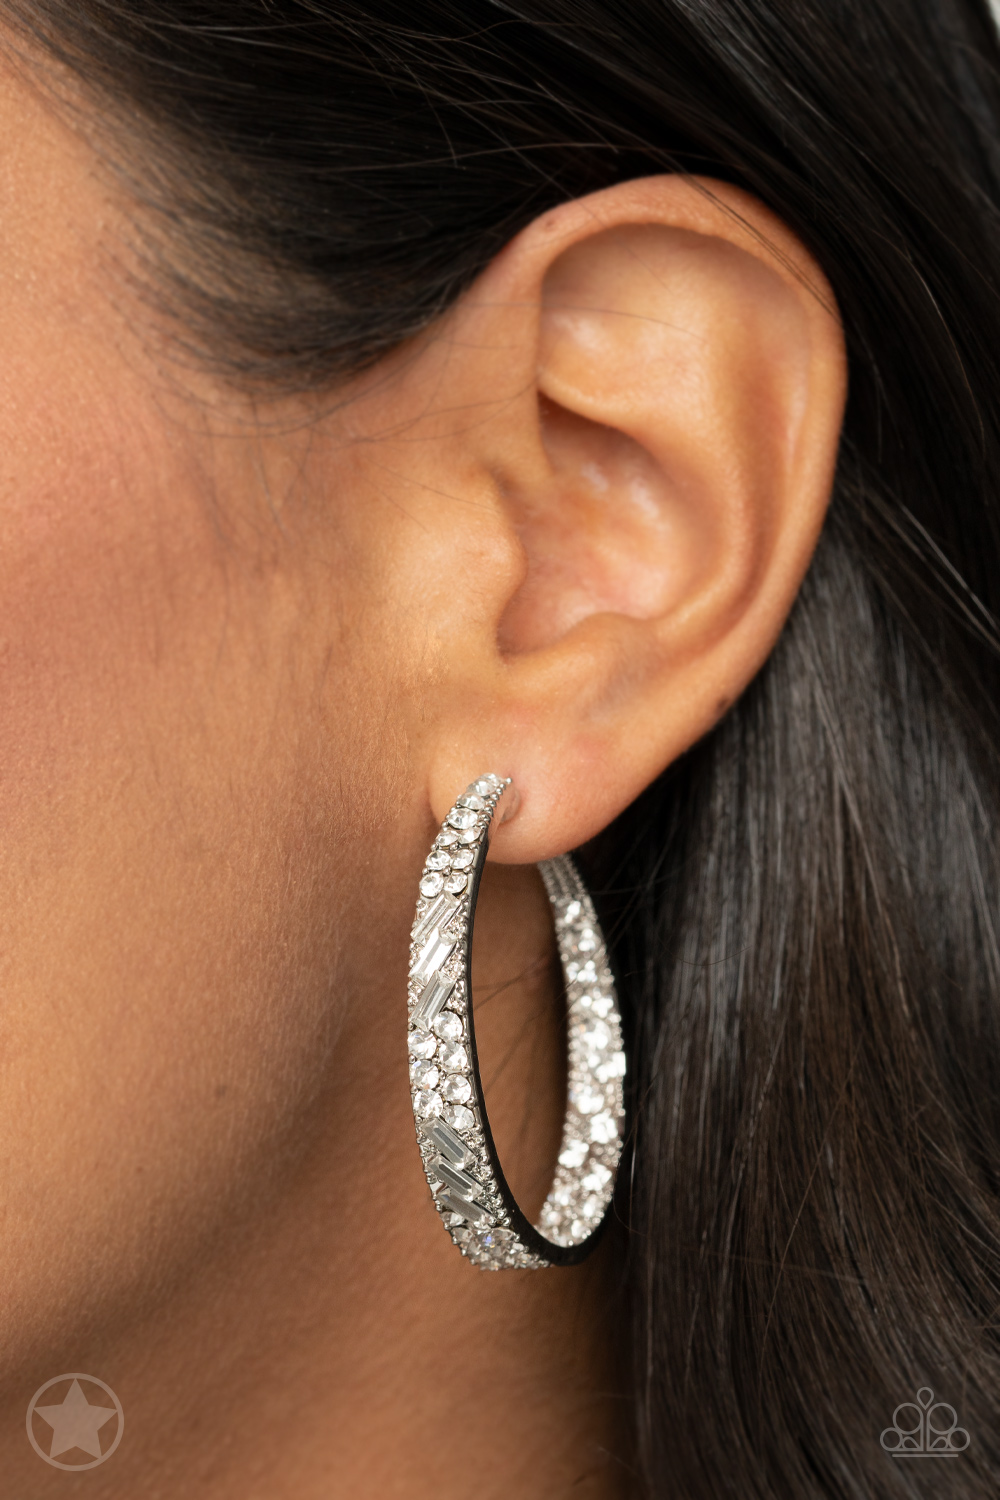 GLITZY By Association - Paparazzi Accessories Earrings